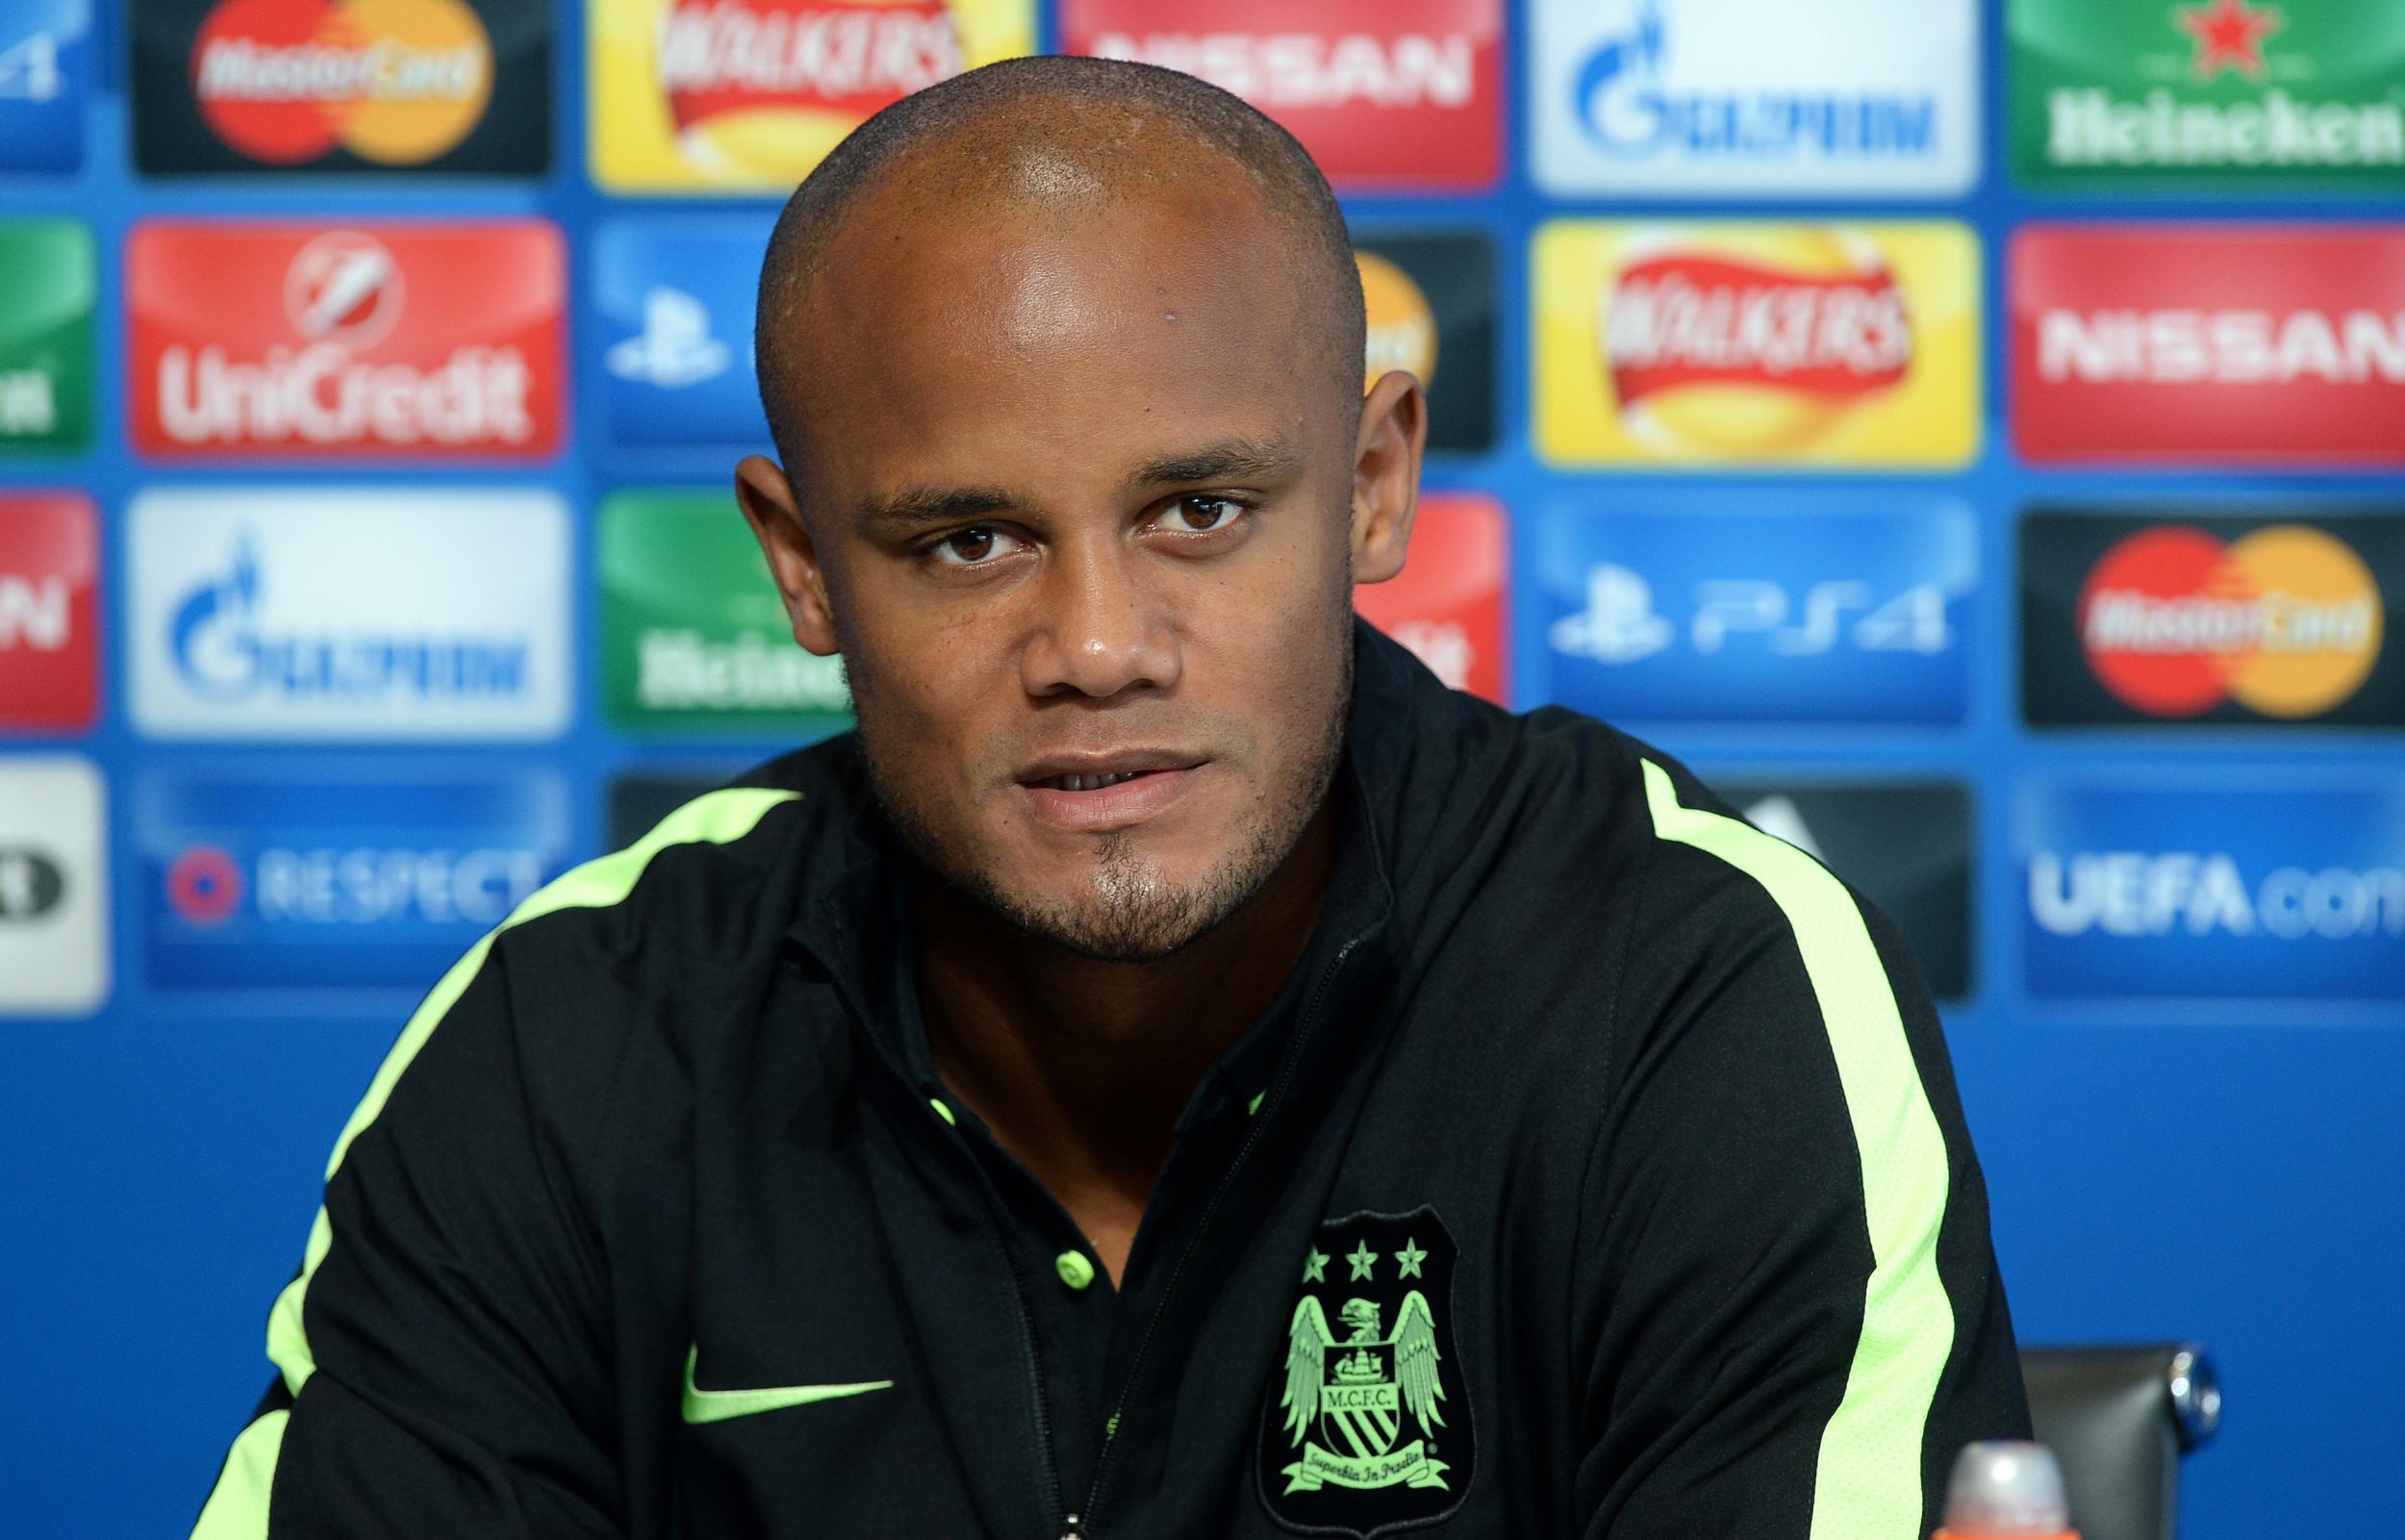 Vincent Kompany defends Molenbeek: 'It's not what the media makes it out to  be' | The Independent | The Independent